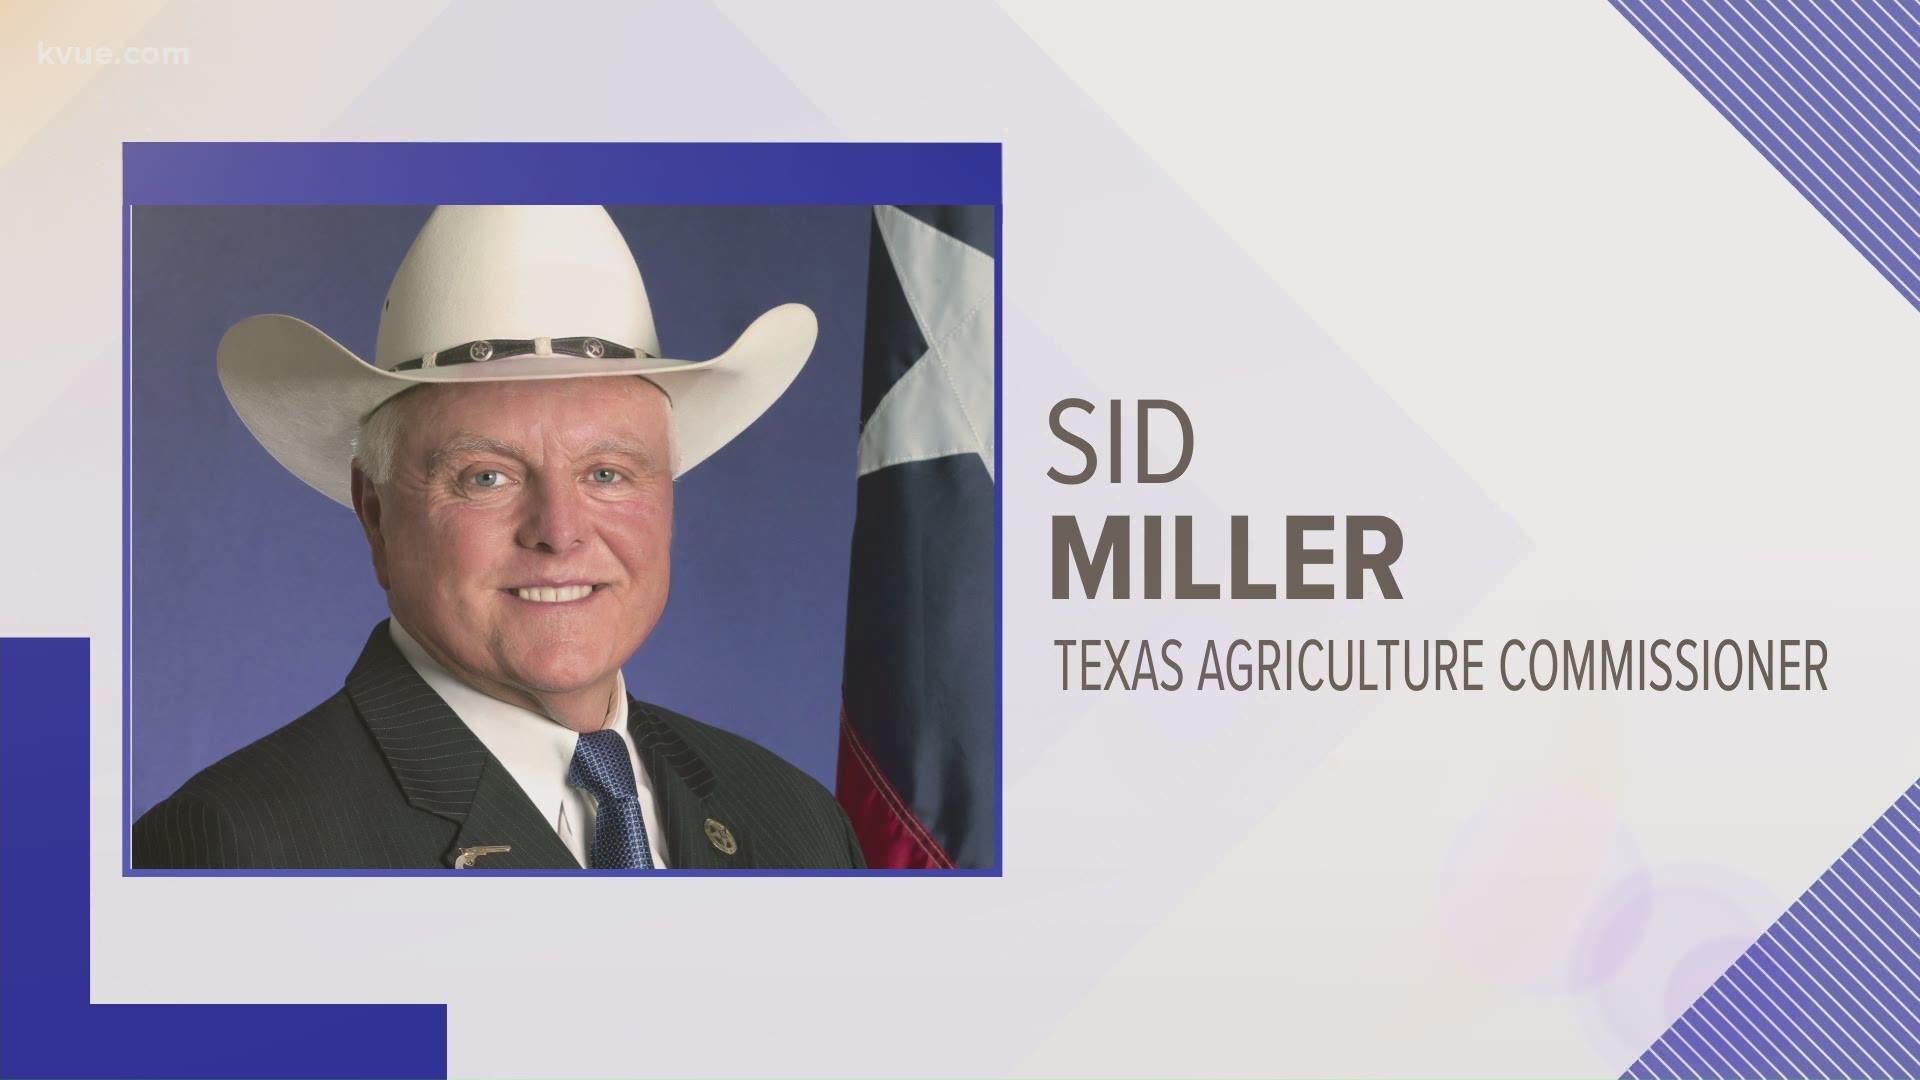 Texas Agriculture Commissioner Sid Miller announced Wednesday night that he has tested positive for COVID-19.